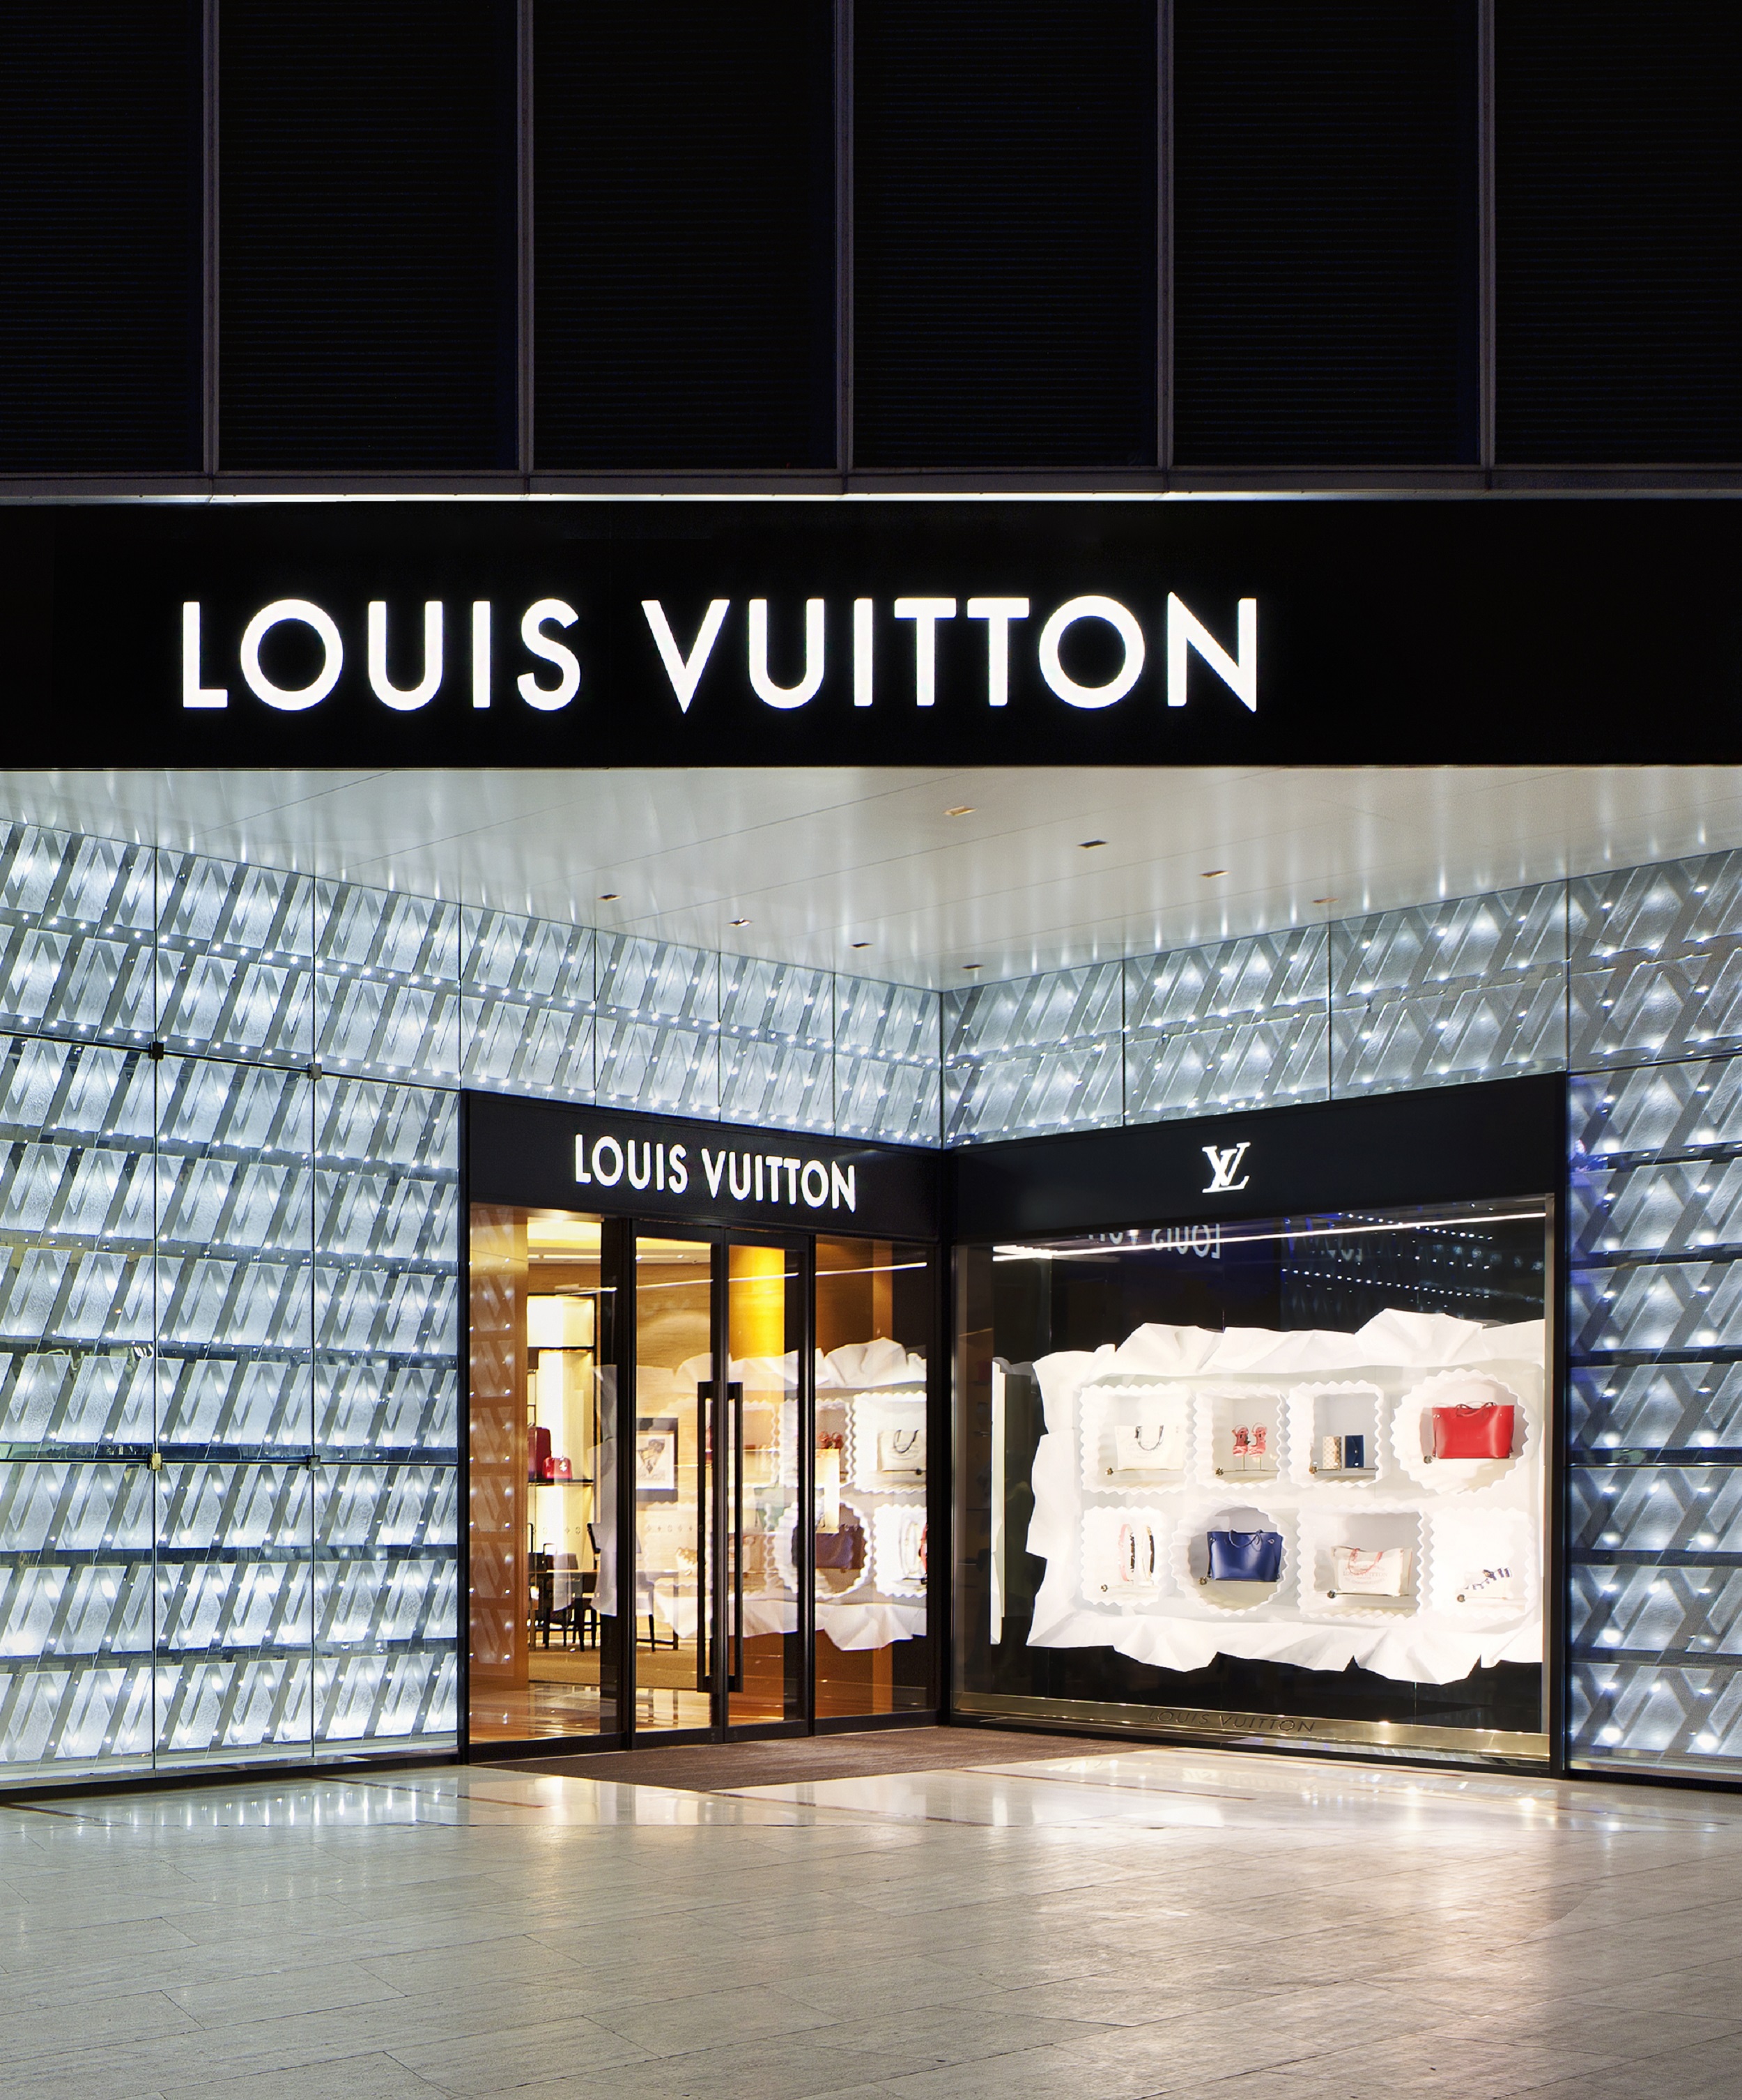 LVMH Proclaims 'Excellent' Start to 2023 as Q1 Sales Rise 17%